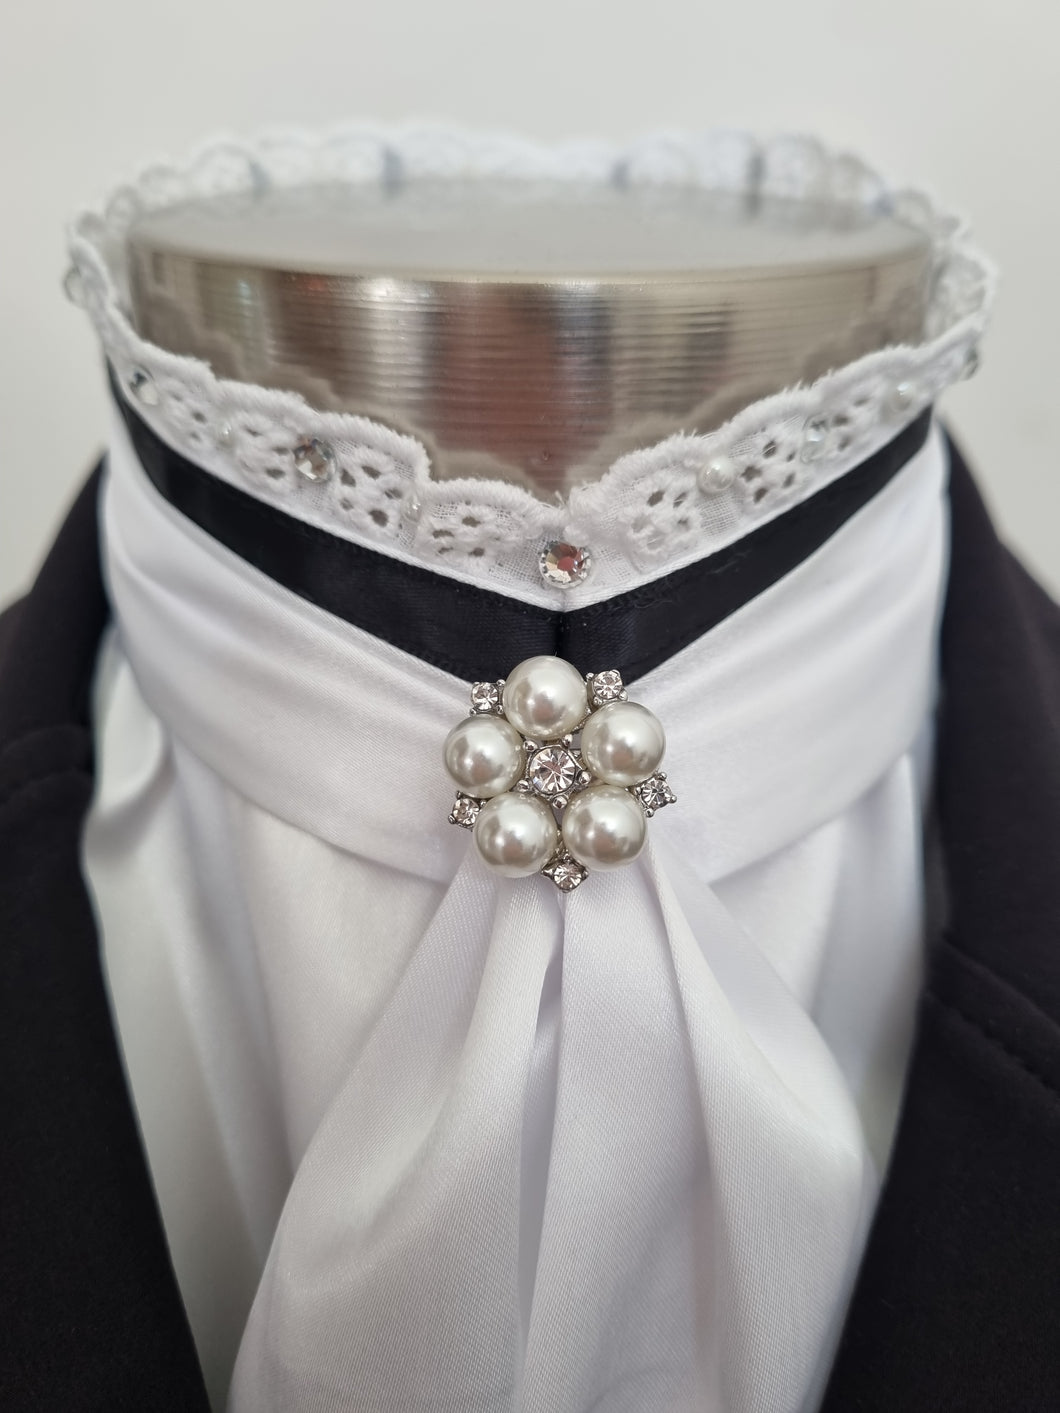 ERA EURO BELLE with PEARLS & CRYSTALS Stock Tie - White lustre satin with Black trim, lace frill, pearl & crystal trim and brooch